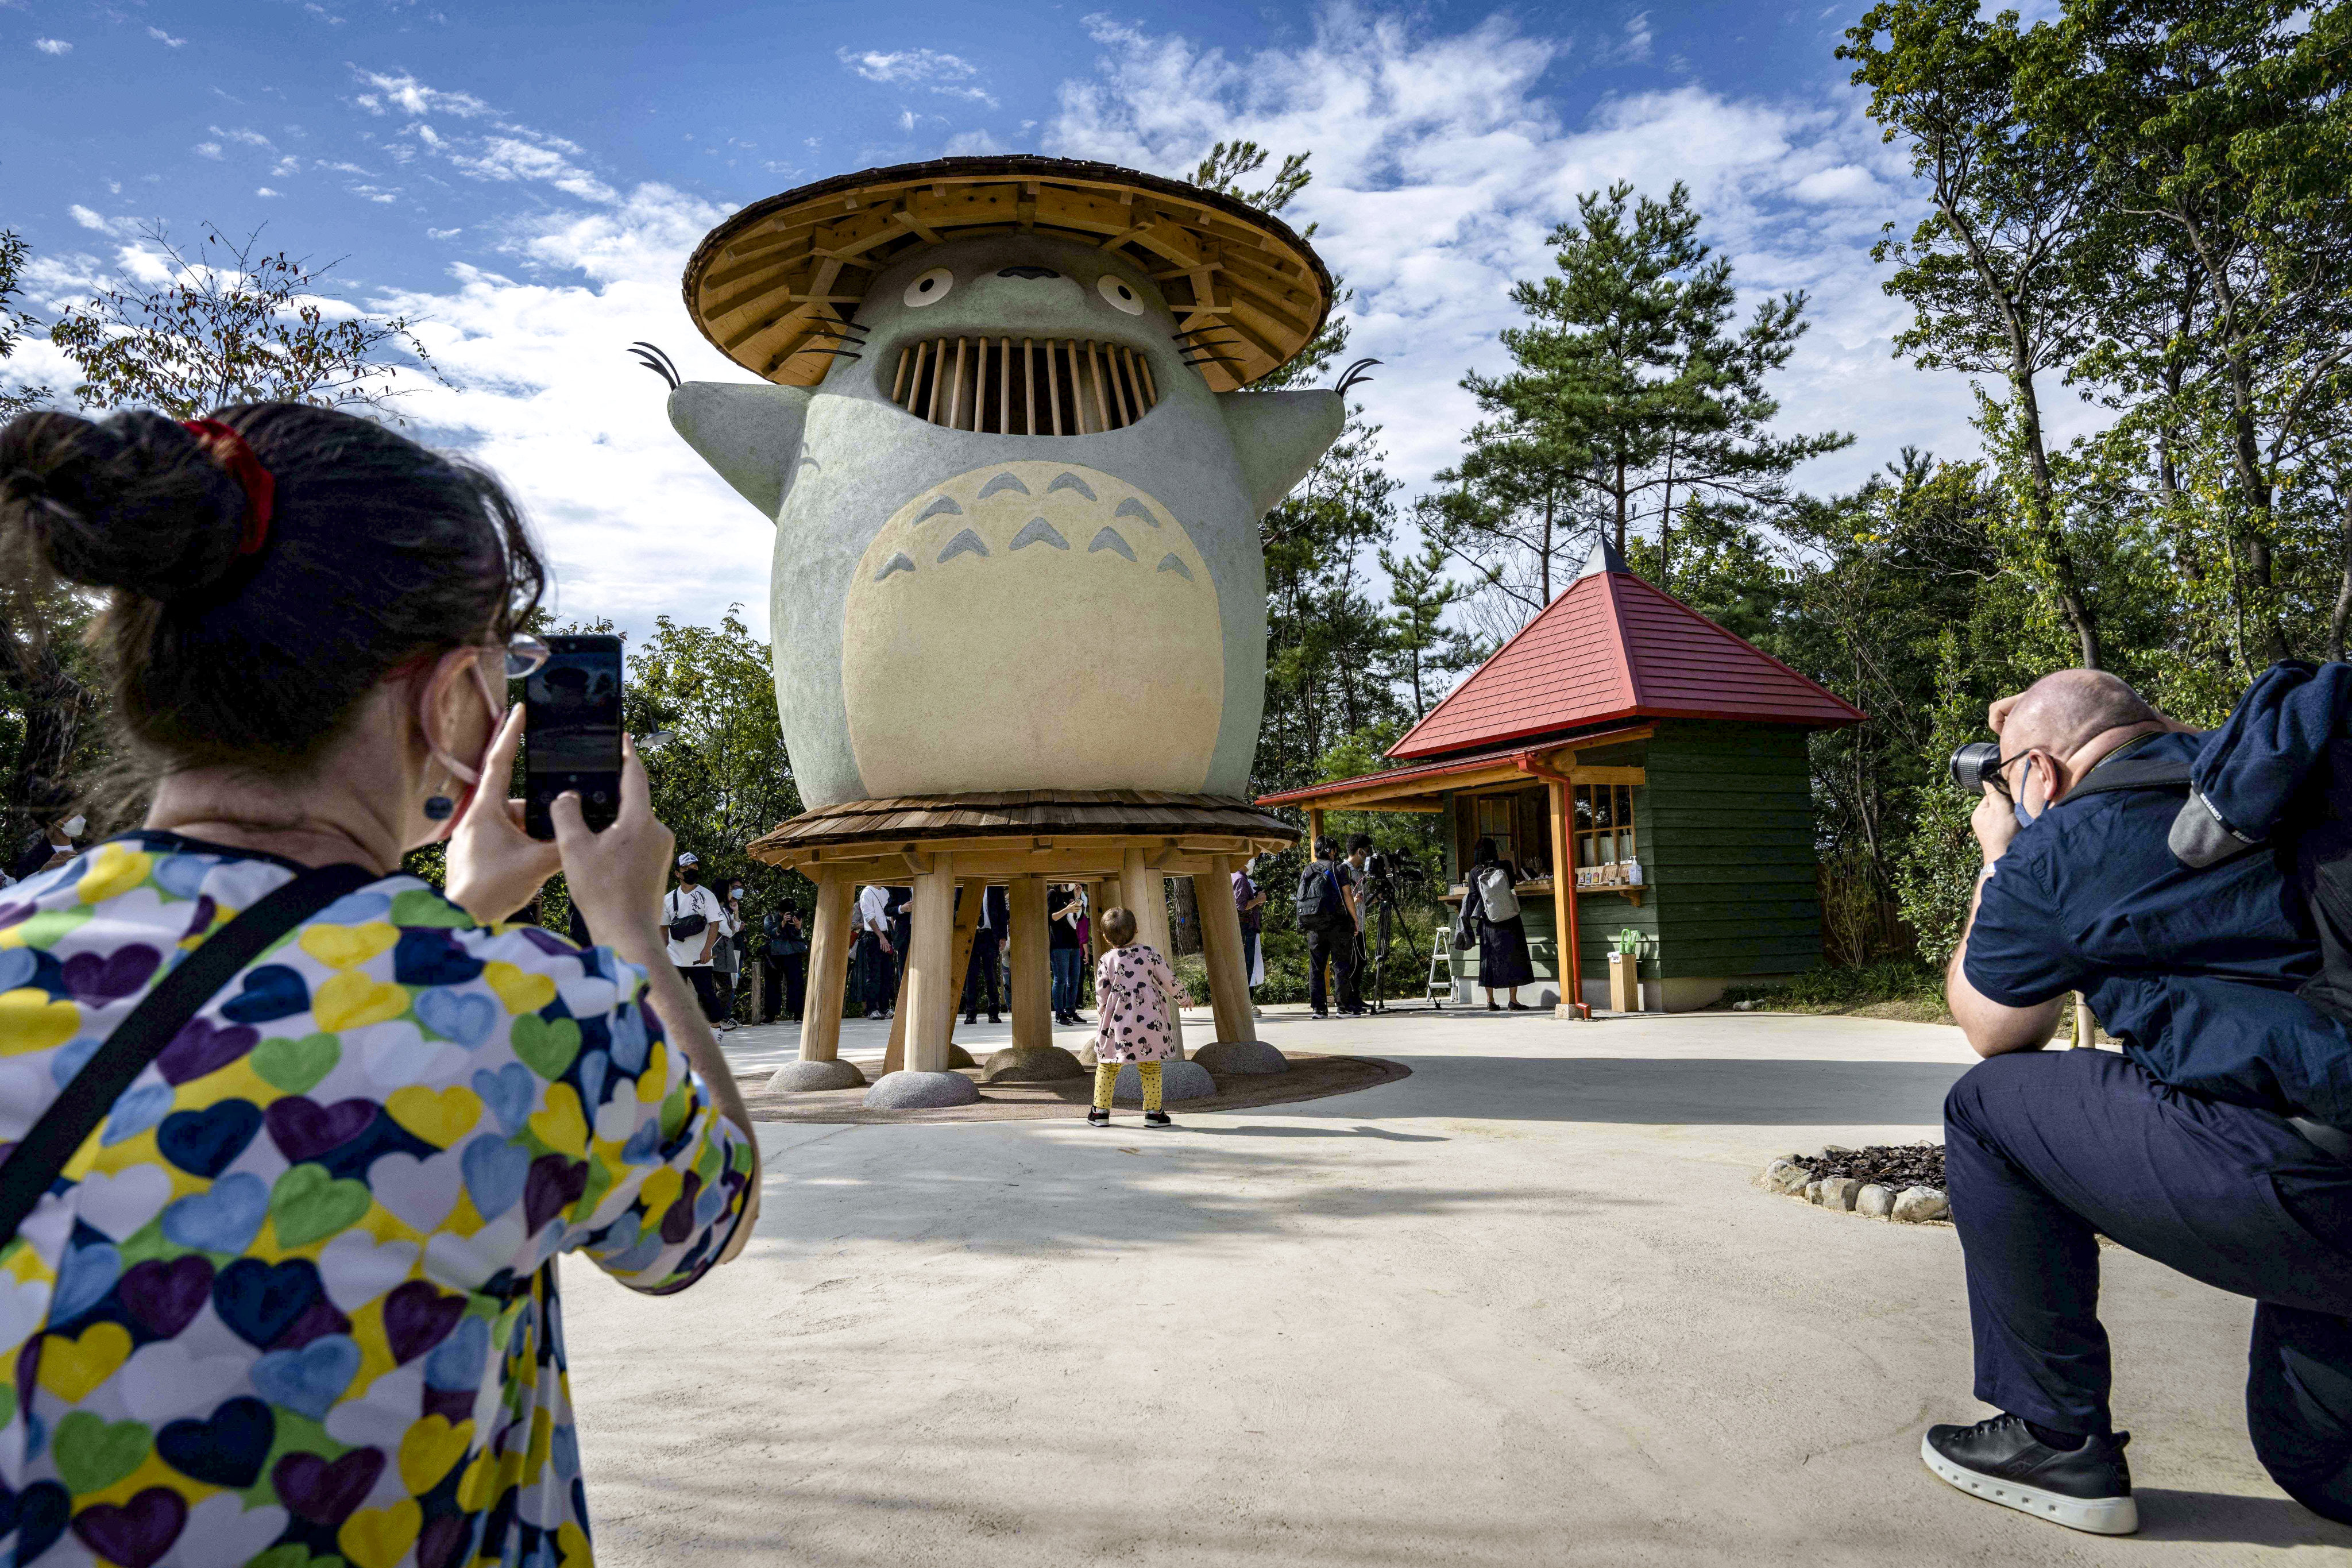 People take pictures of the ‘Totoro’ character at Ghibli Park in Aichi prefecture. Photo: Studio Ghibi/AFP